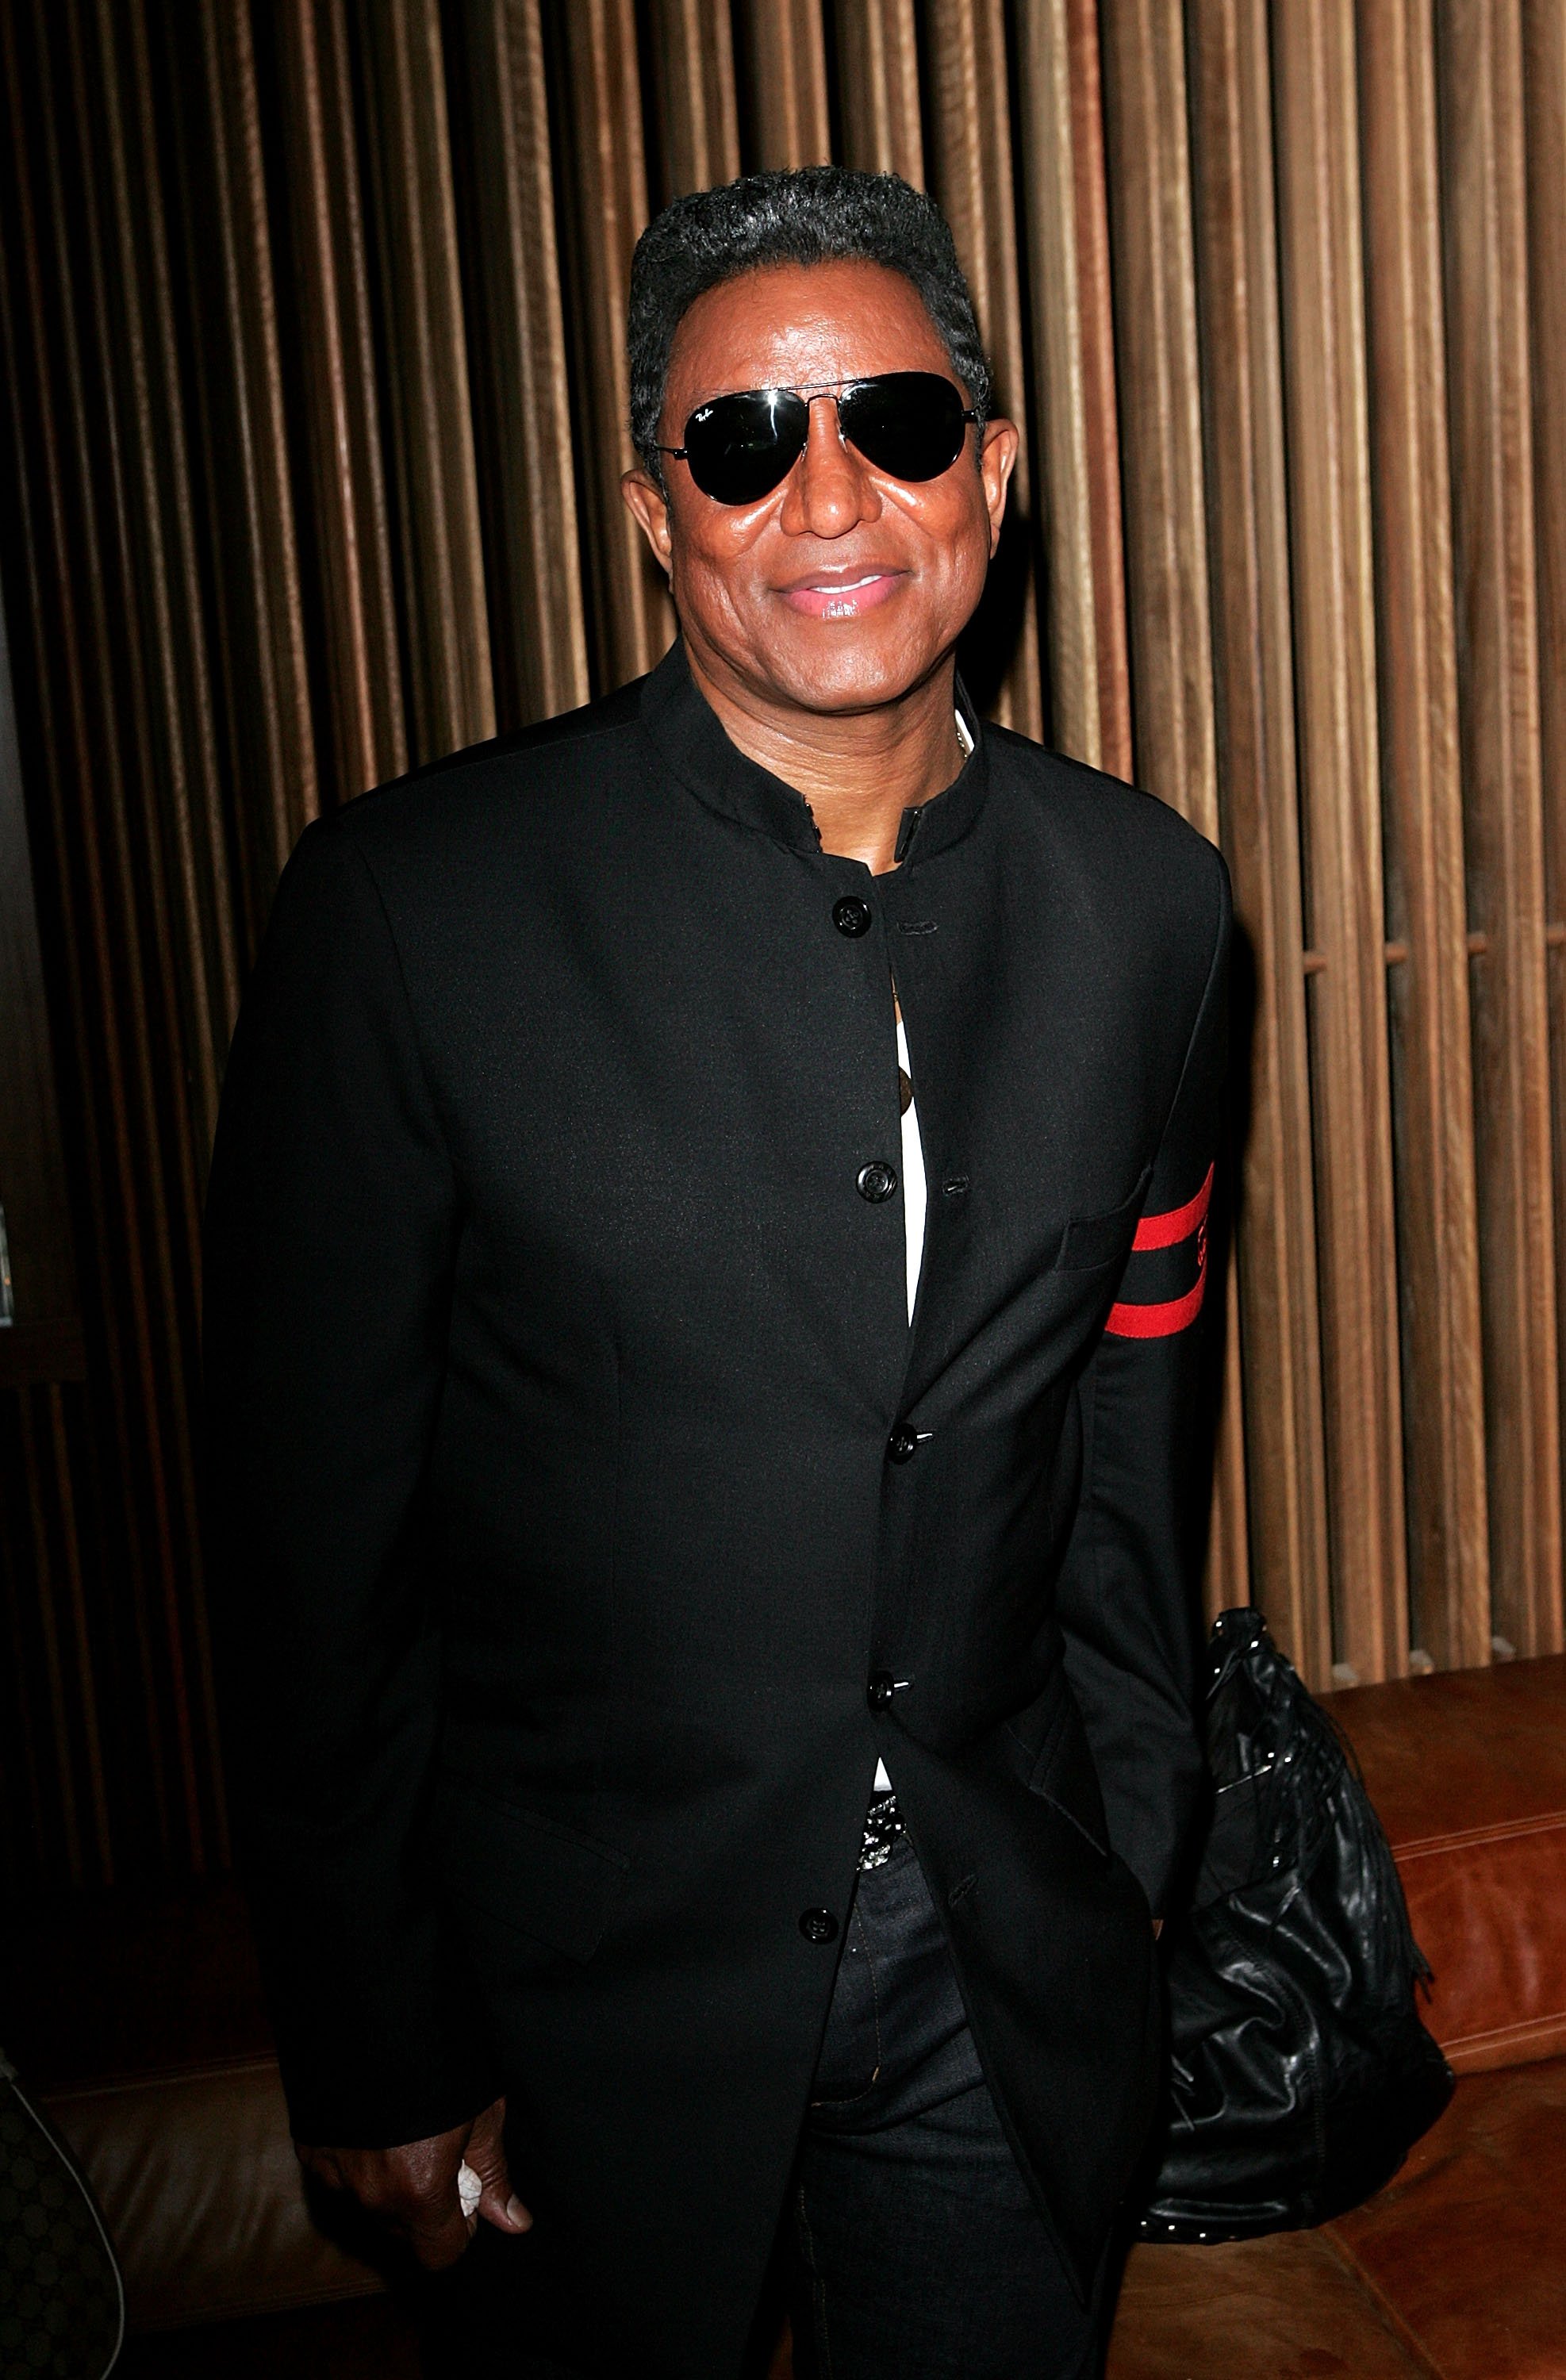 Jermaine Jackson in February 2010 at a drinks reception at Tokonoma in Sydney where he promote d Arena's TV new TV show "The Jacksons: A Family Dynasty." | Photo: Getty